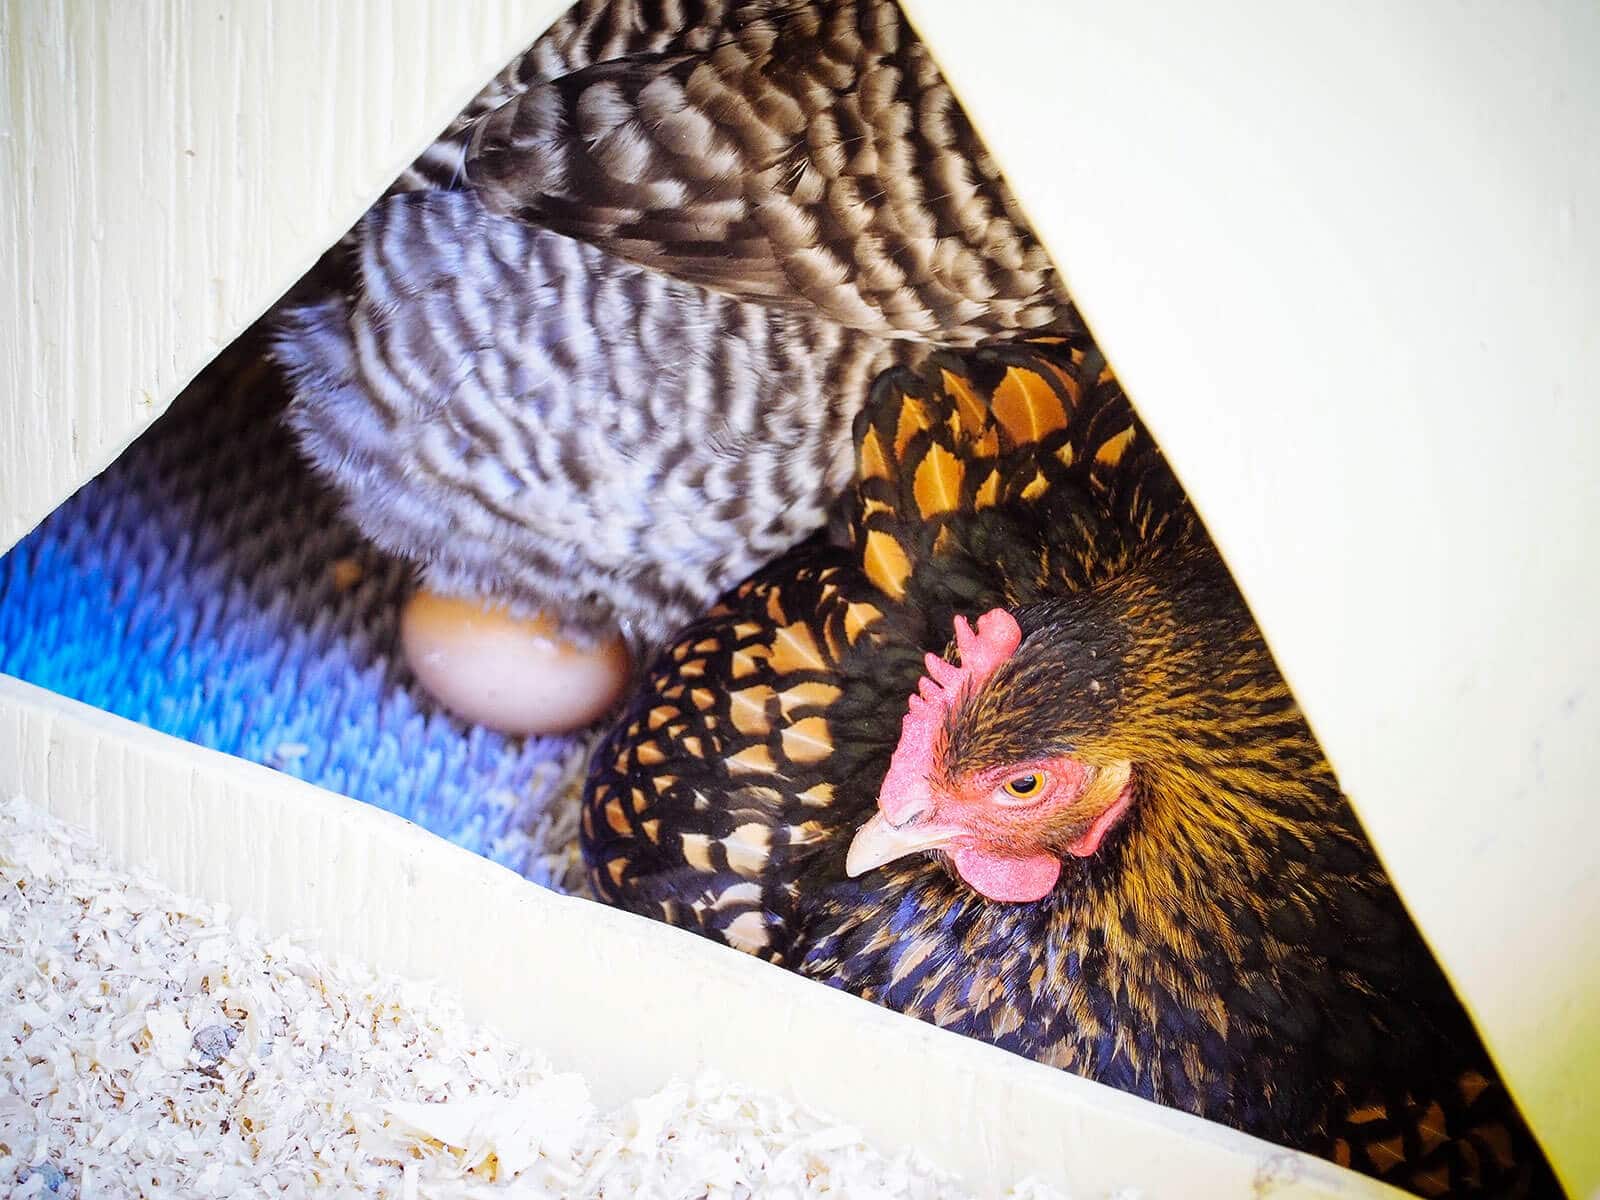 A broody chicken will sit in her nest for several hours a day